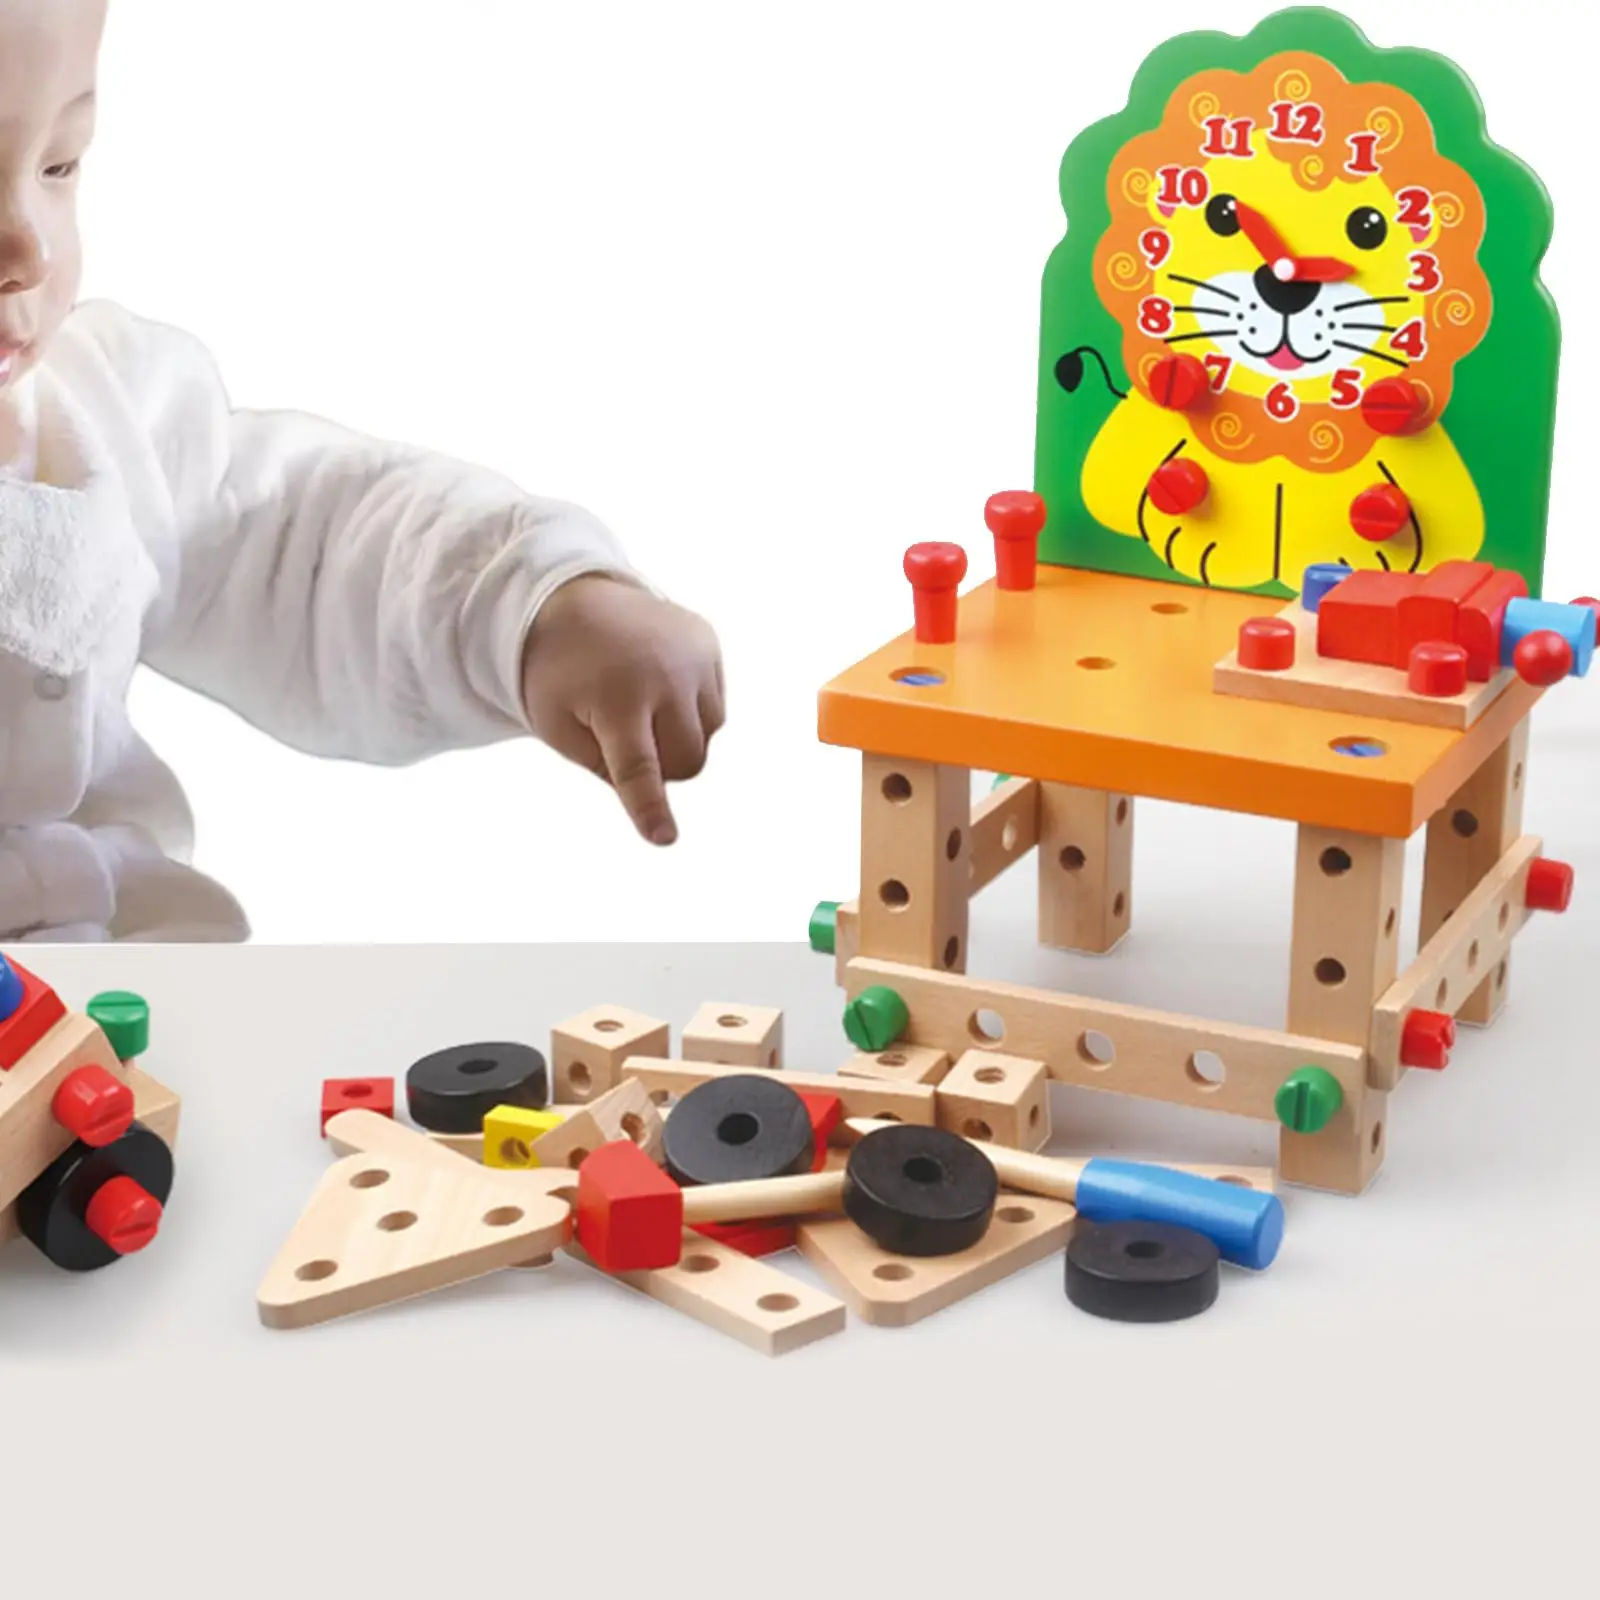 Wooden Assembling Chair Nuts and Bolts Toy Montessori Toys for Girls Boys